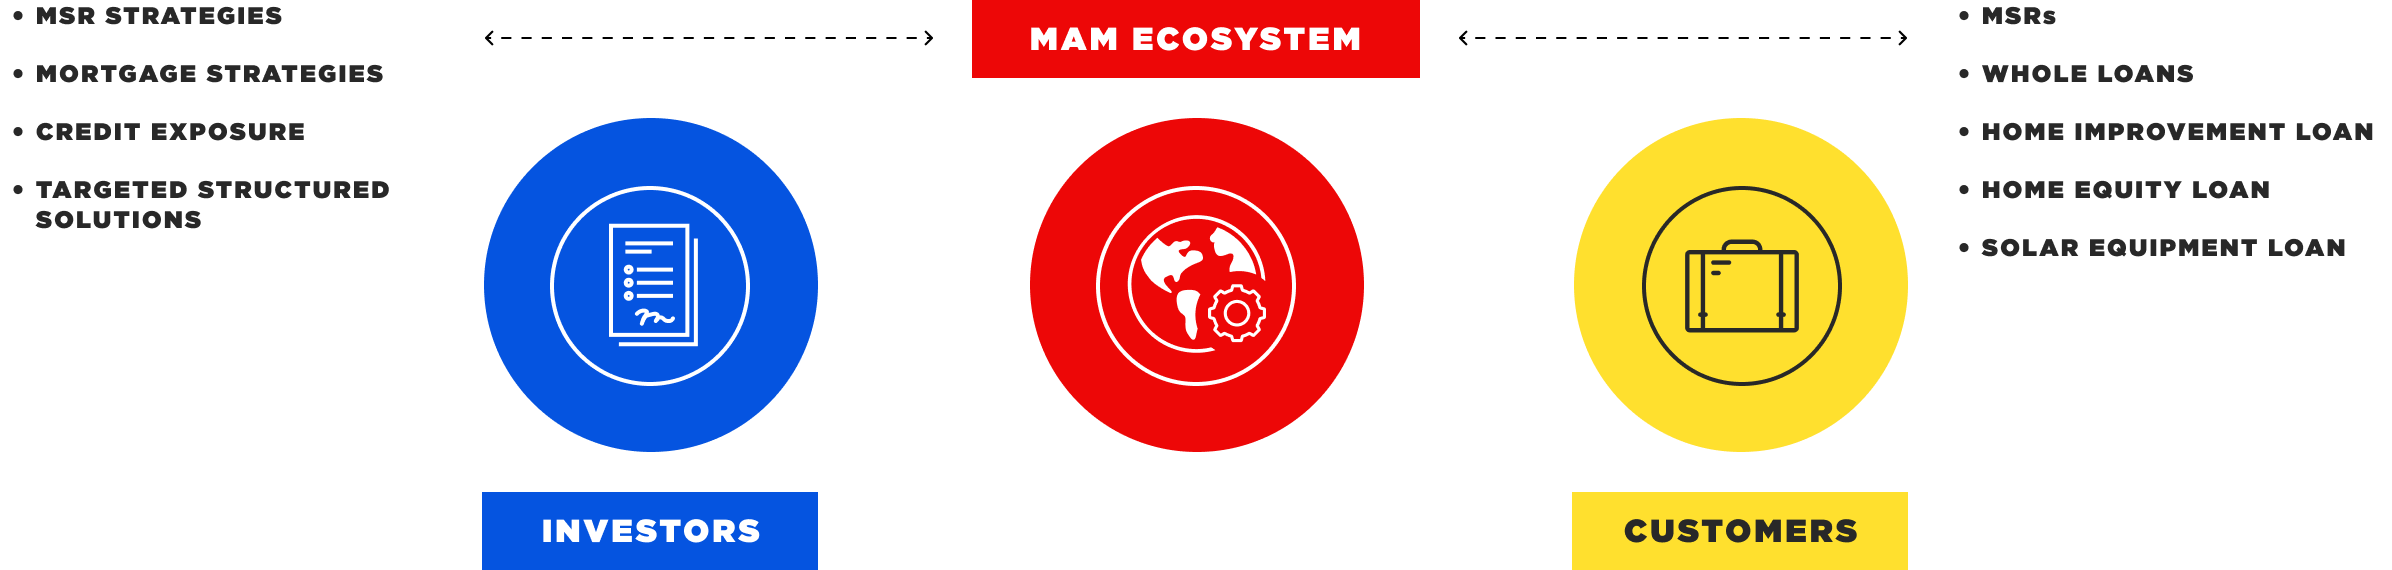 Ecosystem chart. In the center is the MAM Ecosystem, with Investors and Cutsomers around it.